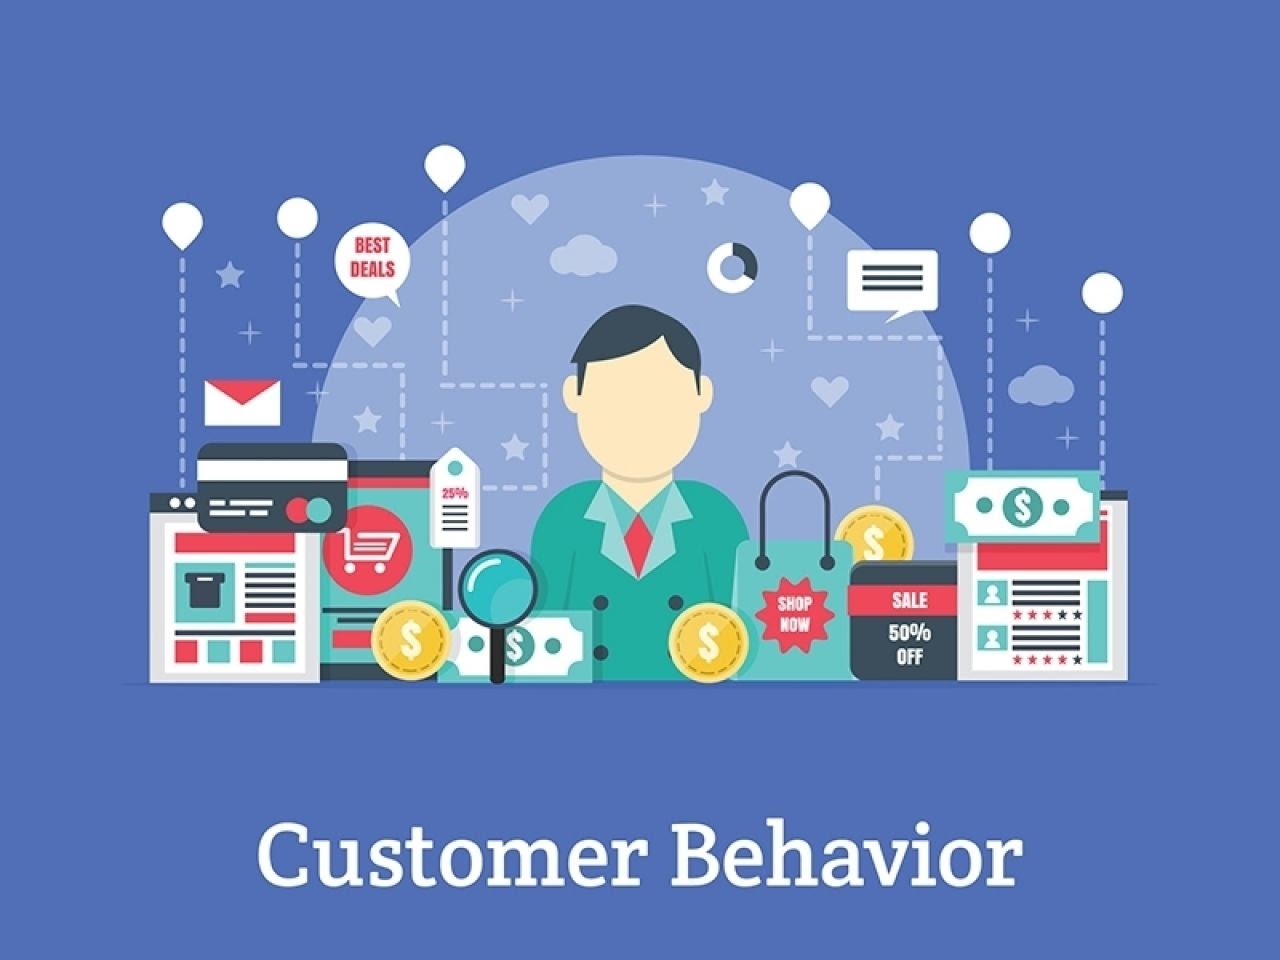 How does customer buying behavior change over the years?